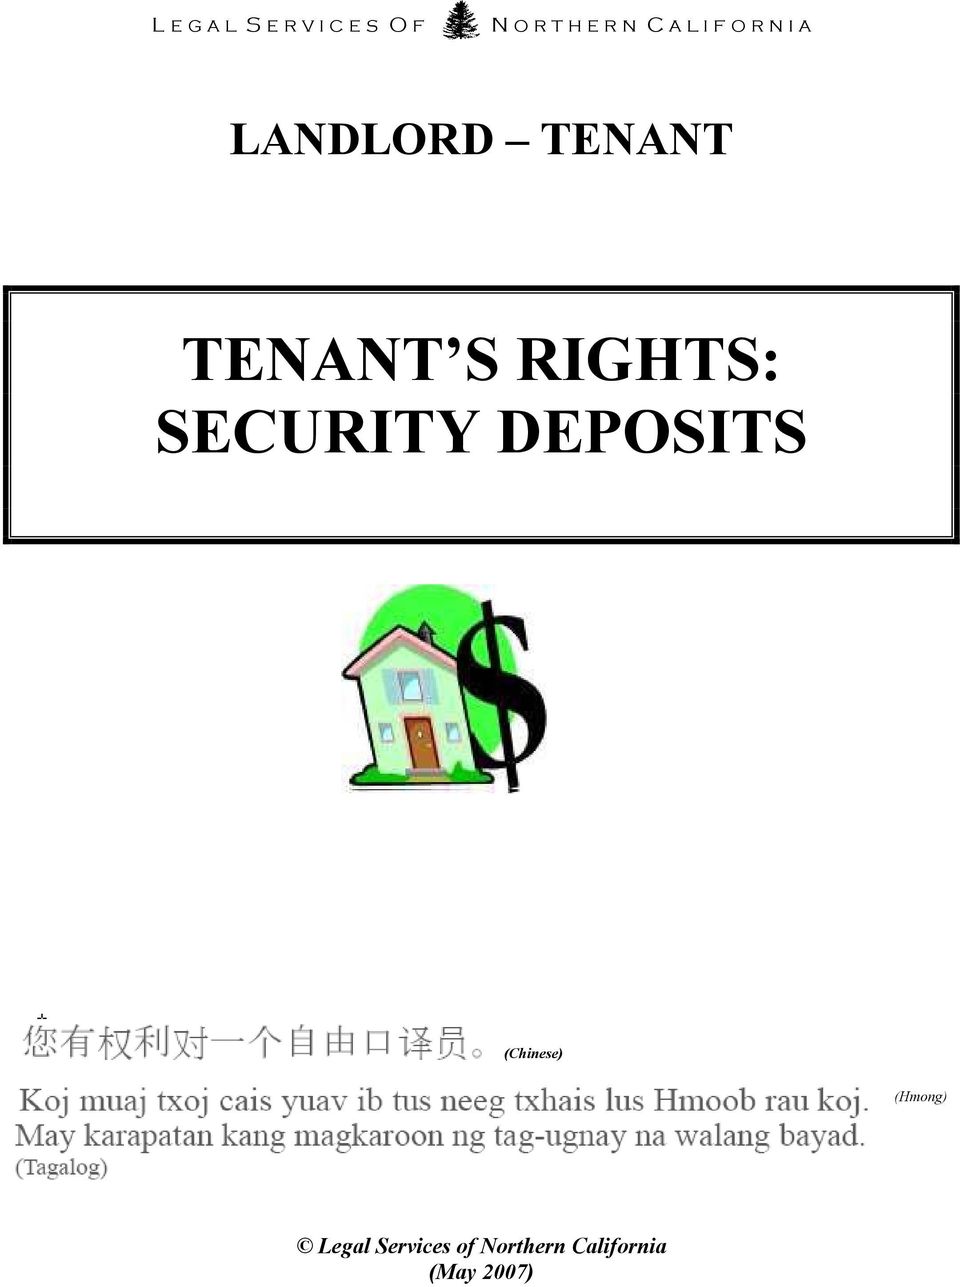 RIGHTS: SECURITY DEPOSITS (Chinese) (Hmong)